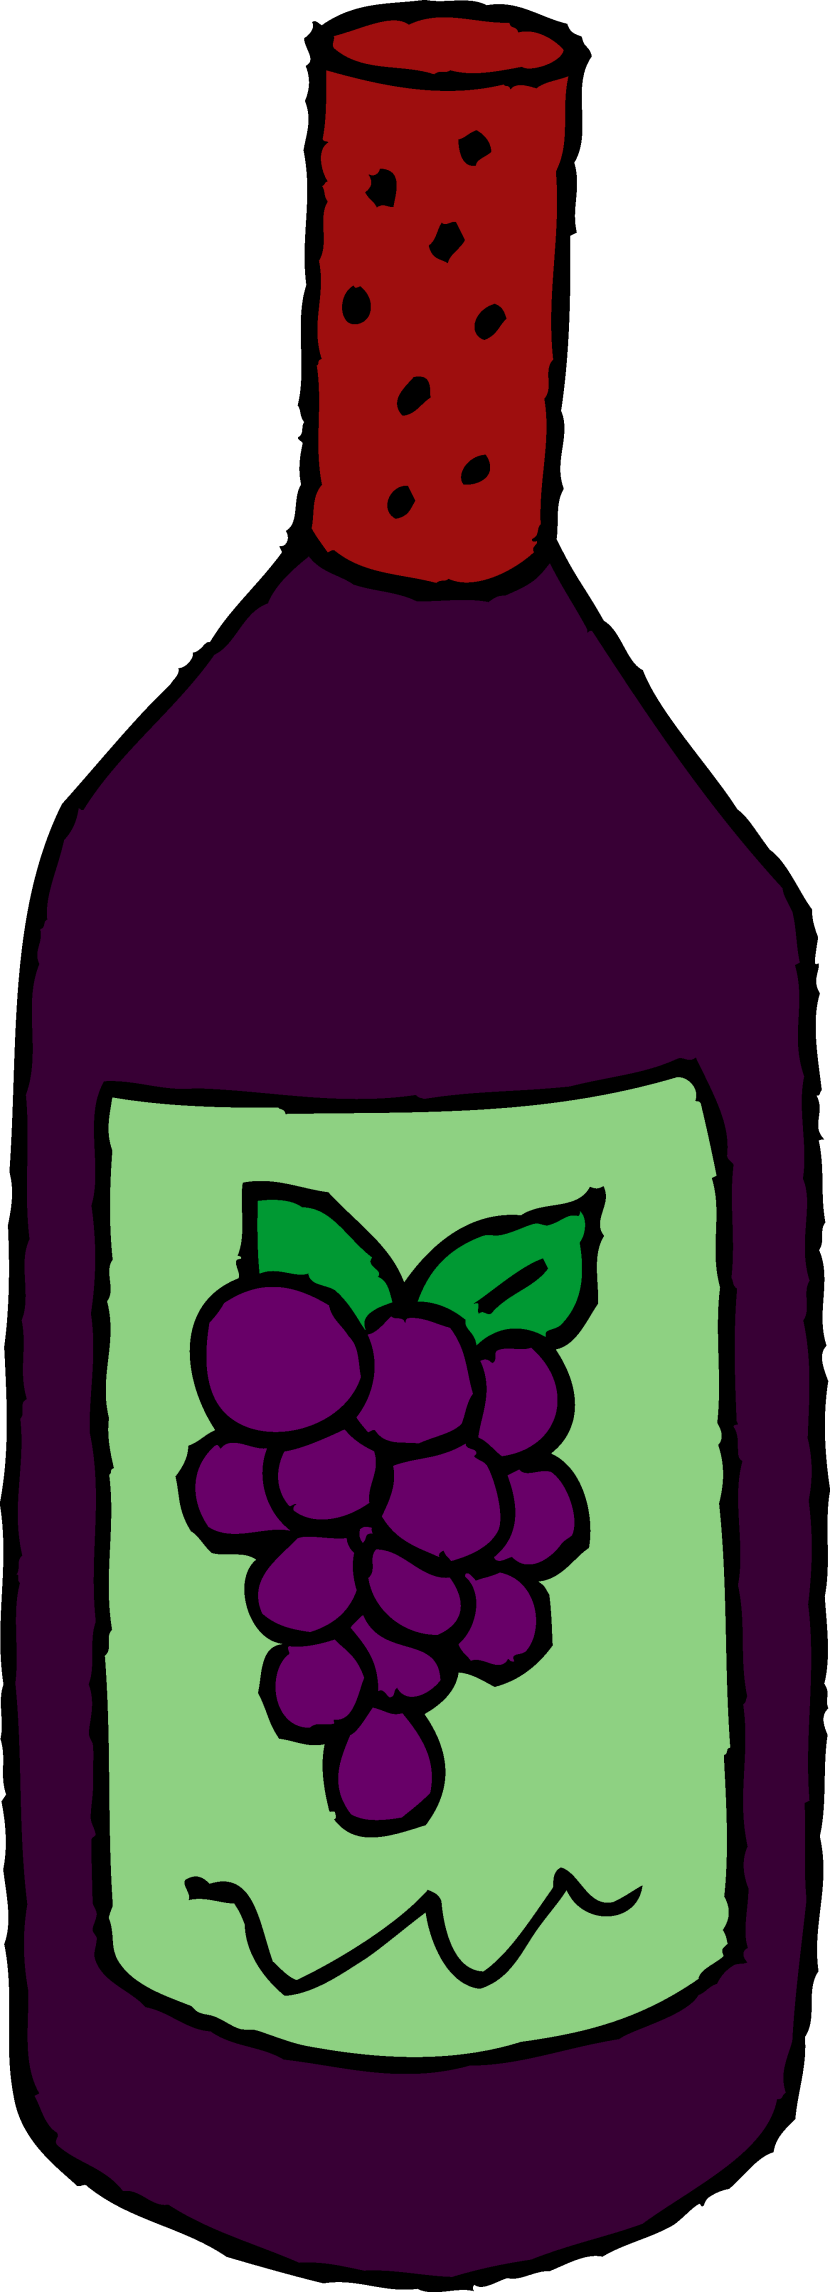 Wine clipart wineclipart bottle and glass clip art 2